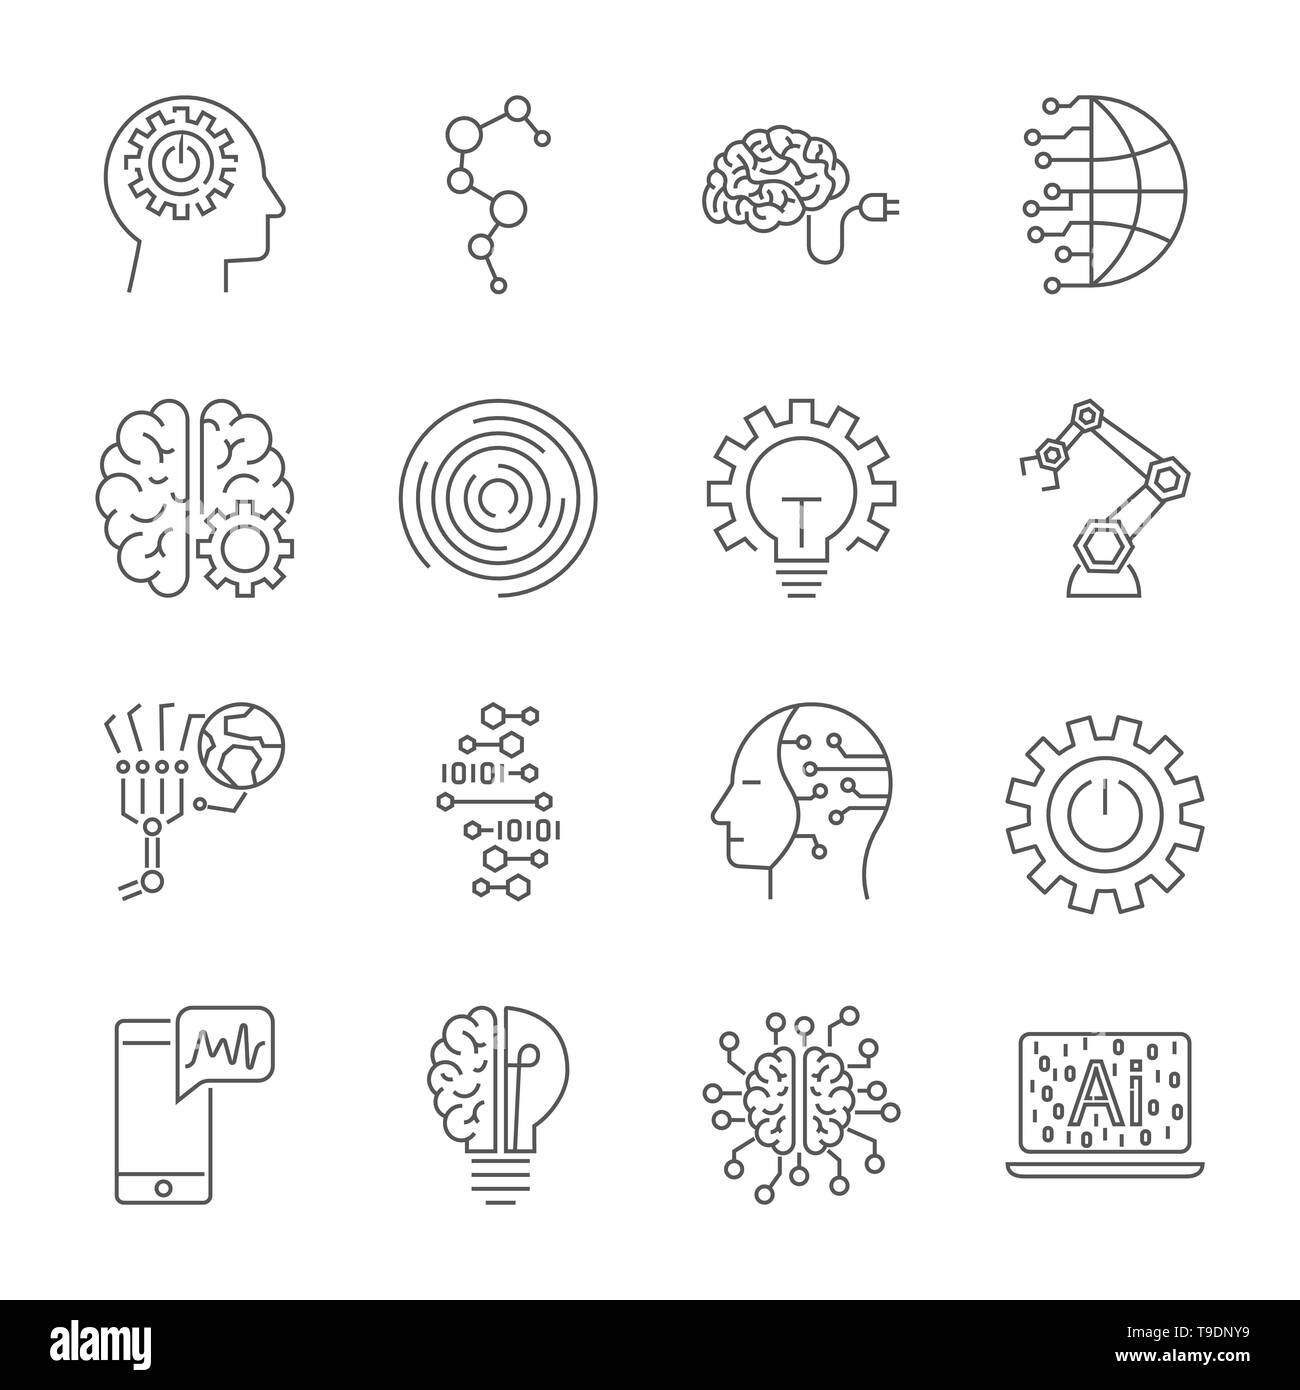 Simple Set of Artificial Intelligence Related Vector Line Icons. Contains such Icons as Face Recognition, Algorithm, Self-learning and more. Editable Stock Vector